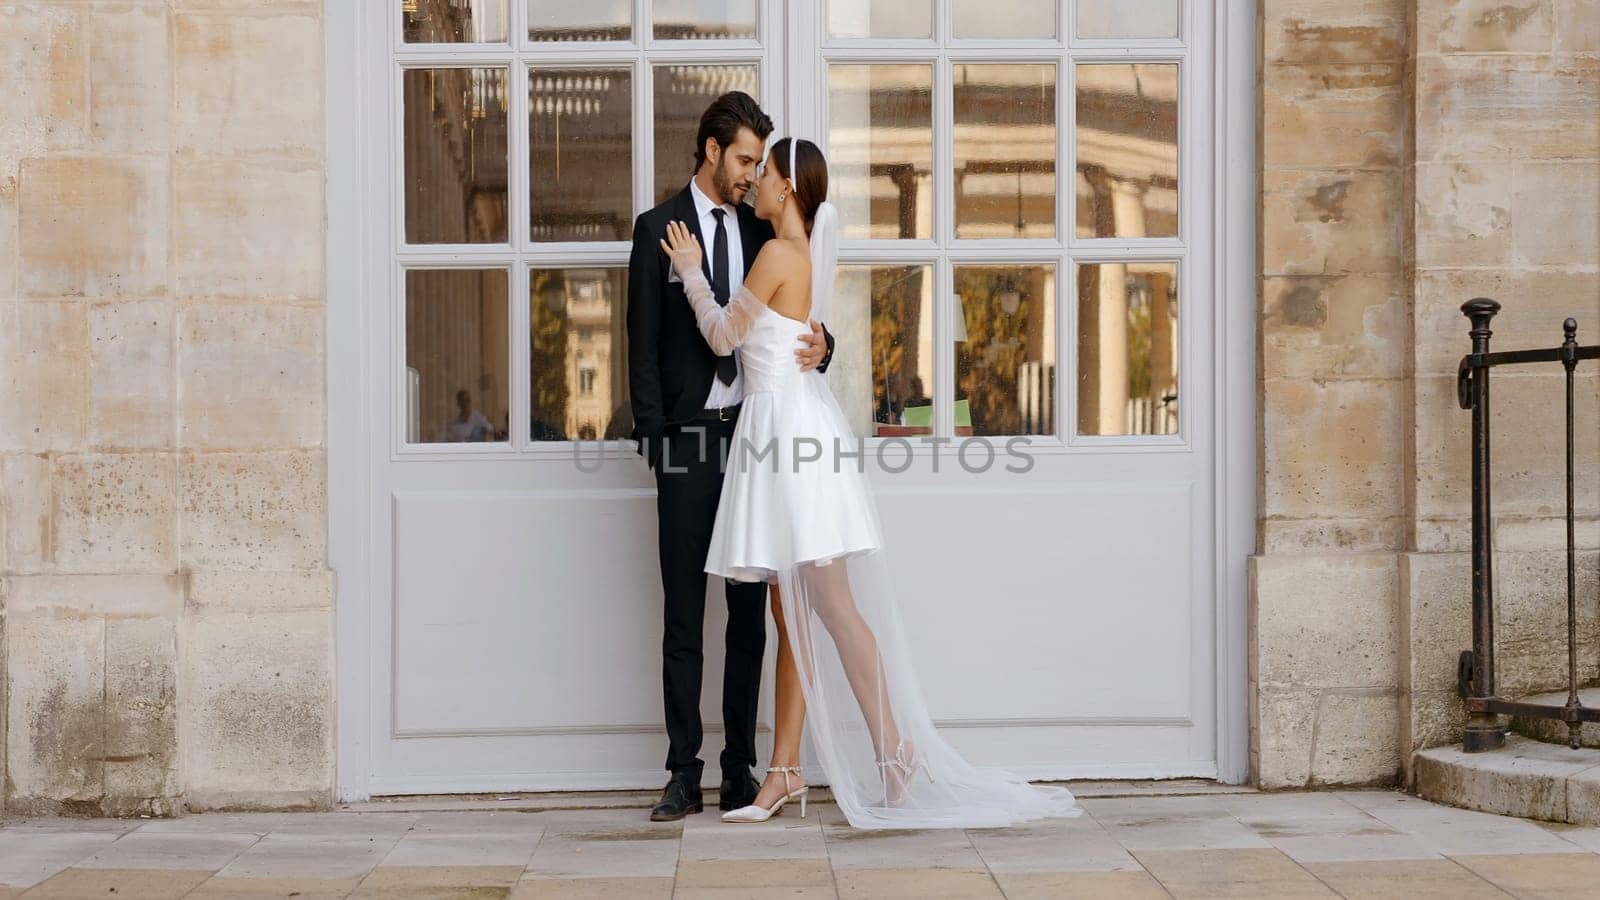 Happy newlyweds embracing each other by the white entrance door with windows. Action. Young and pretty man and woman in suit and white short dress